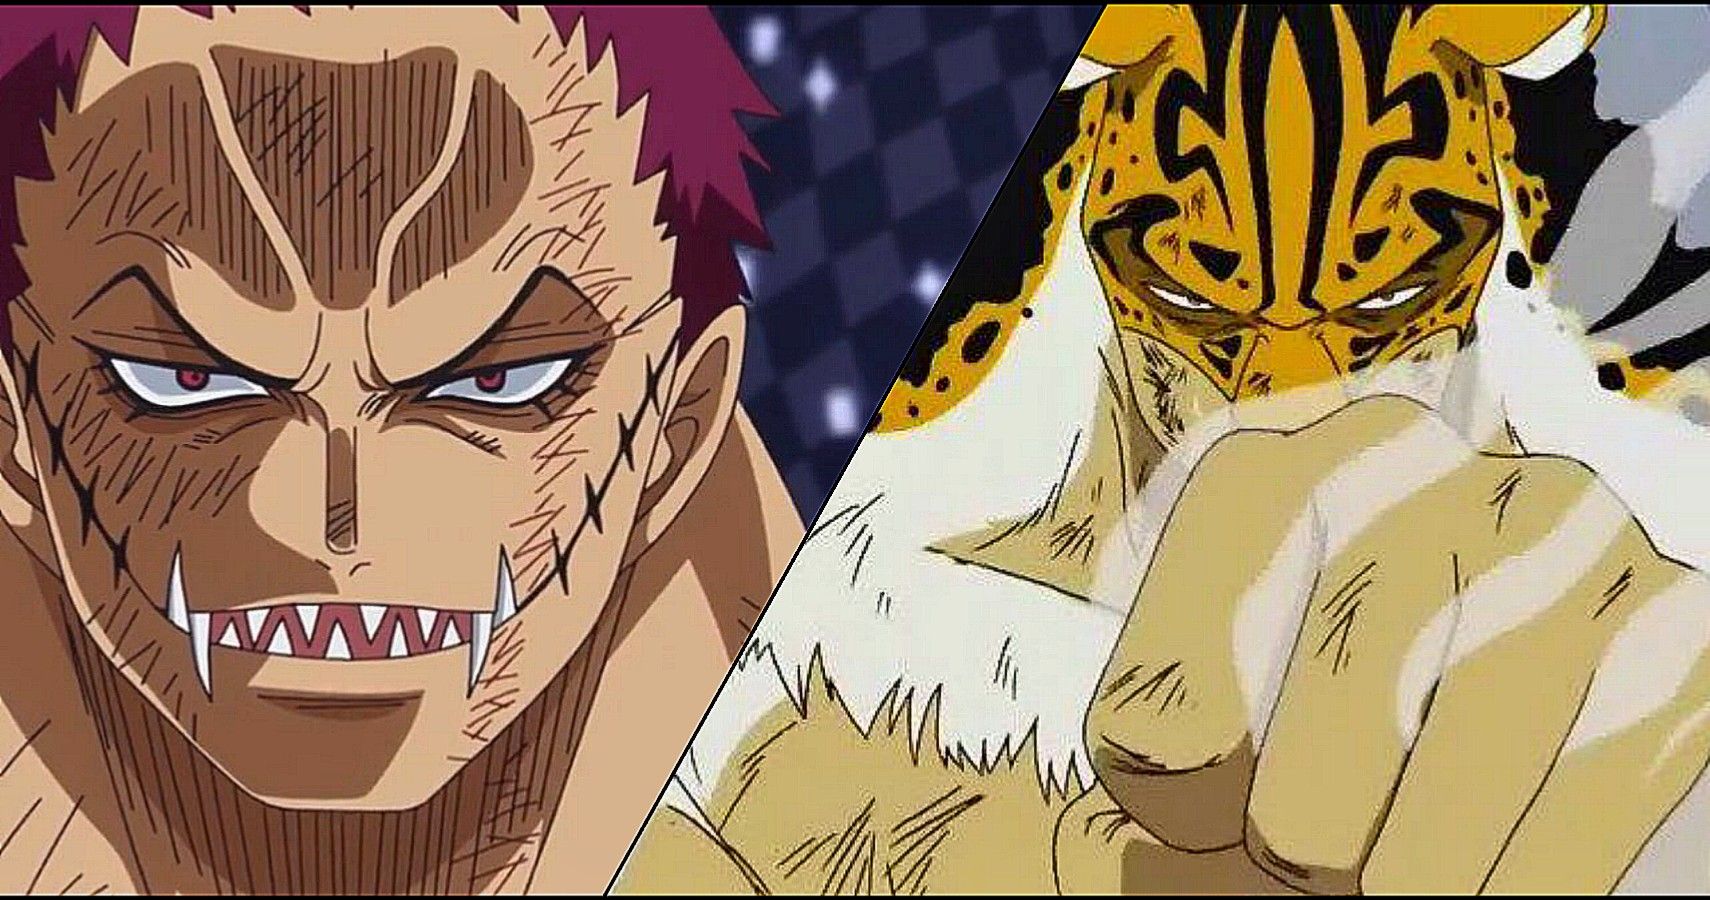 One Piece: 10 Facts Every Fan Should Know About Charlotte Katakuri